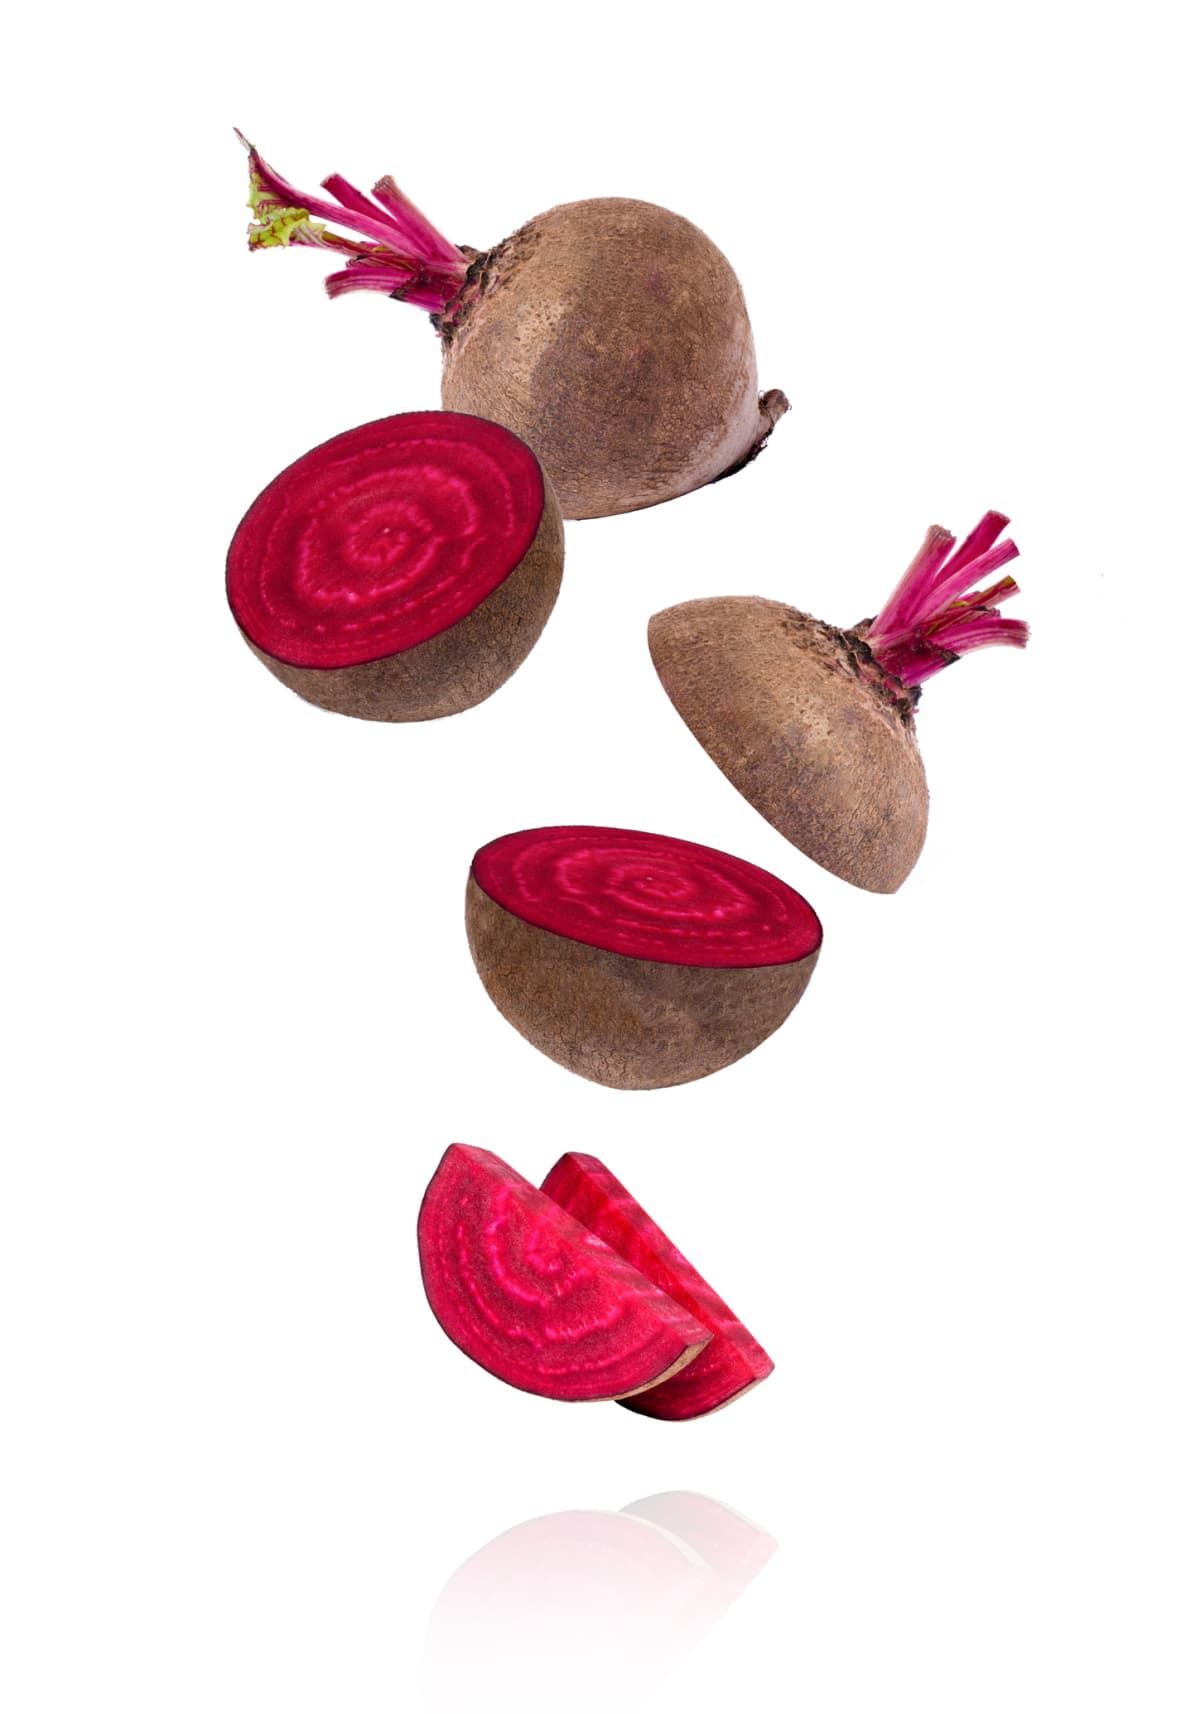 Beets isolated on white background